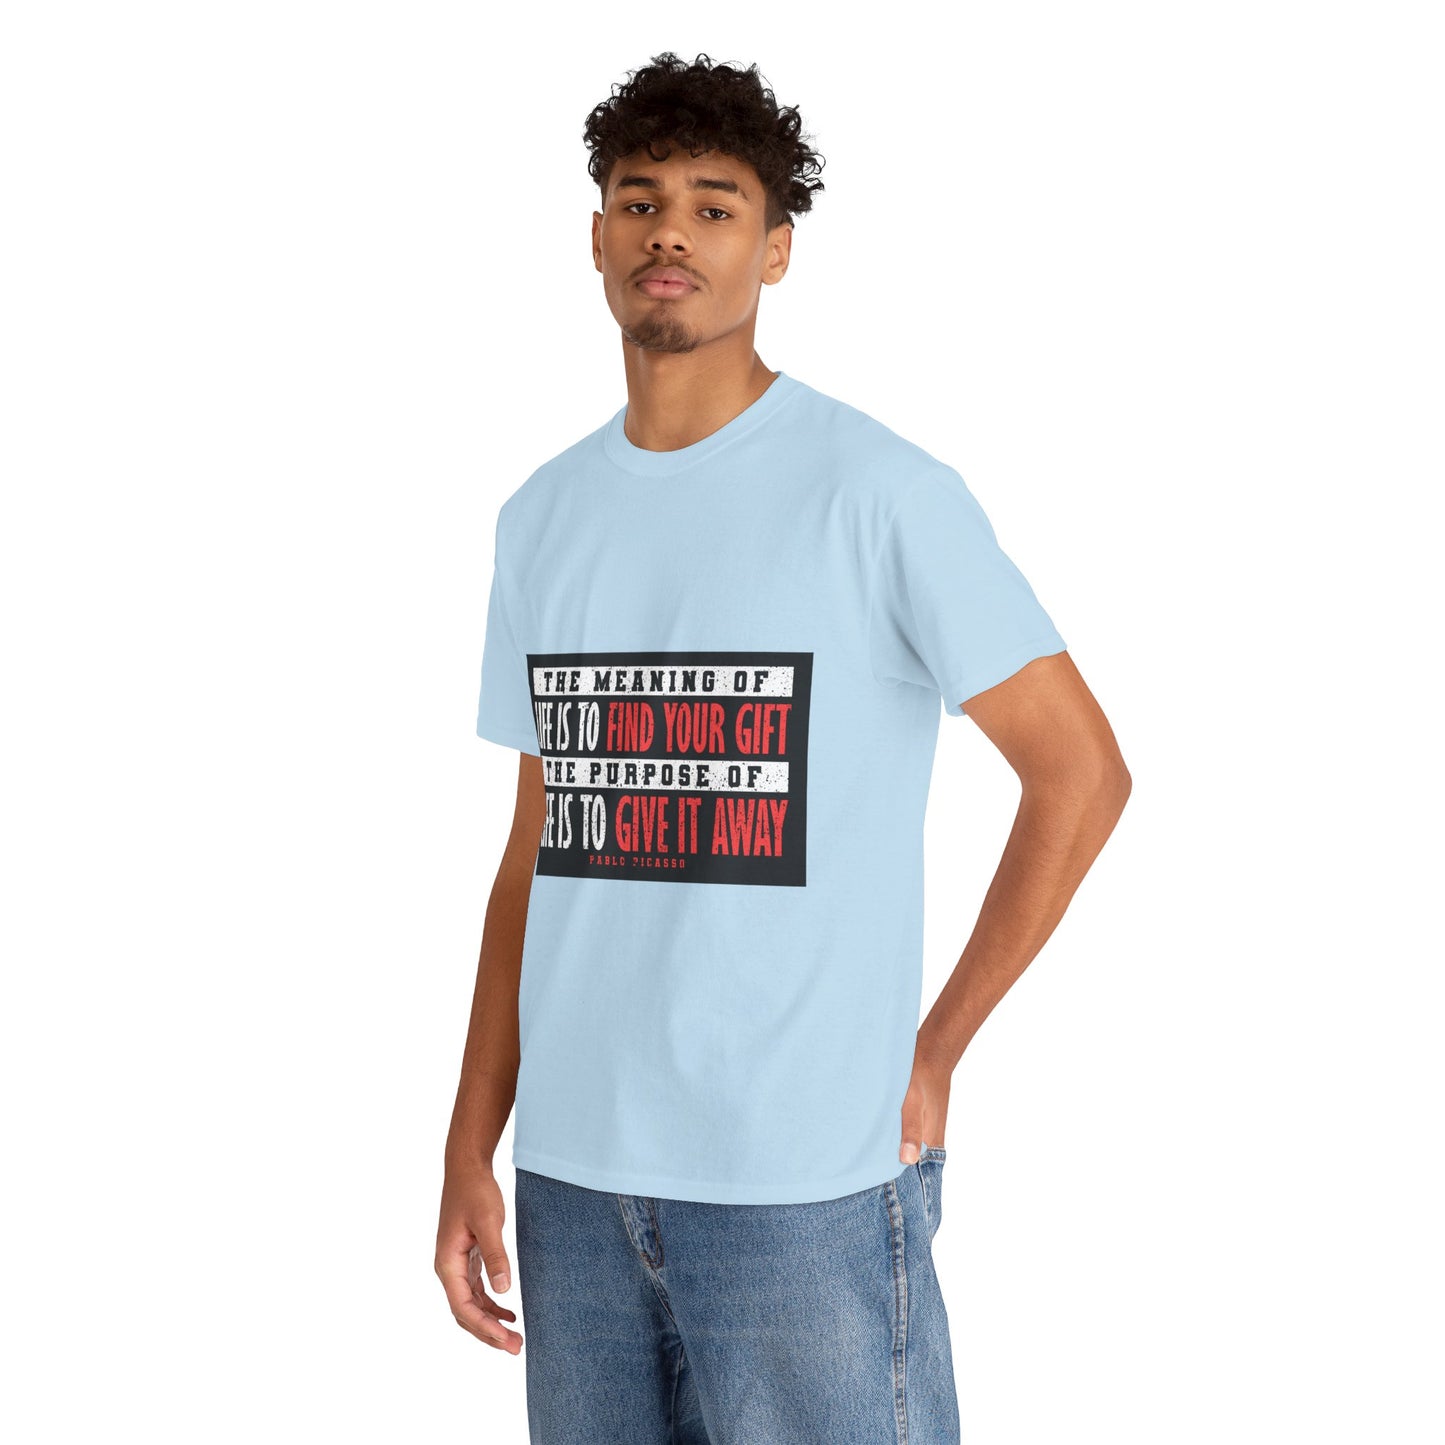 The Freedom Fighter T-Shirt: The meaning of life to find your gift the purpose